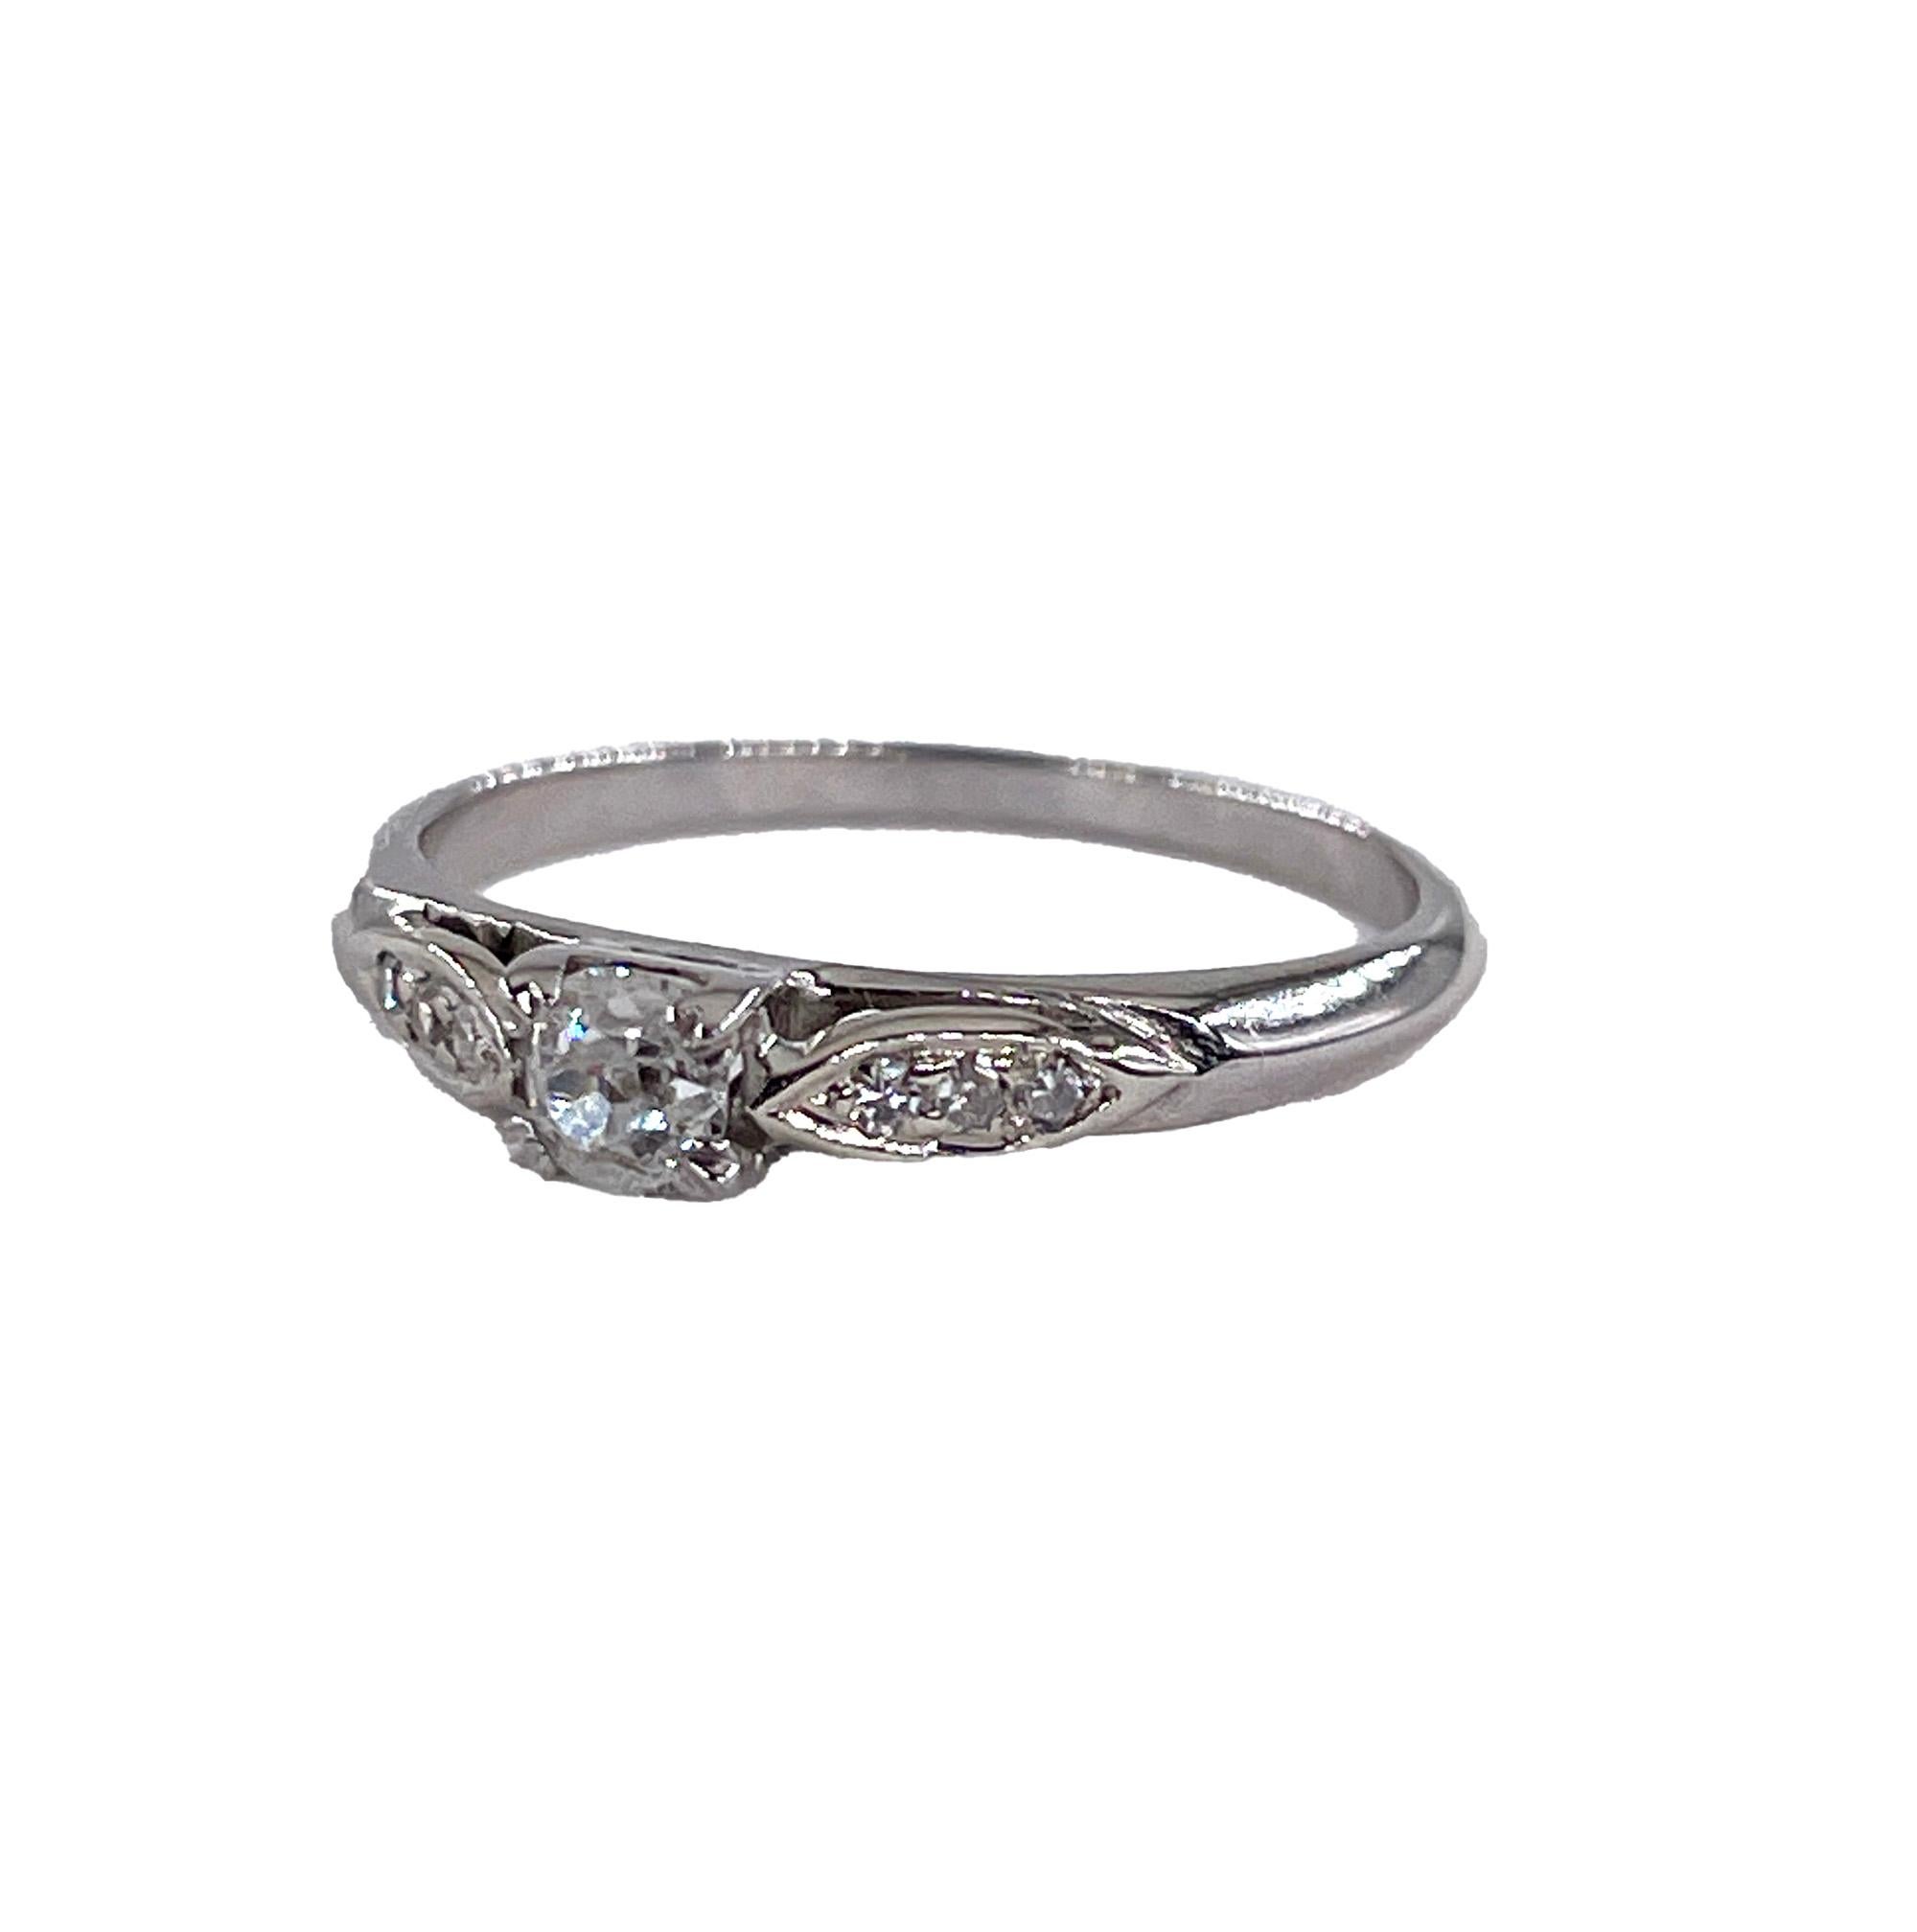 This is a VERY sweet and and utterly charming, this petite ART DECO CIRCA 1939s DIAMOND Engagement or Promise ring with estimated 0.17ctT OLD MINE CUSHION Center diamond in G-H color, SI clarity (White and eye Clear), Unusually high quality for that